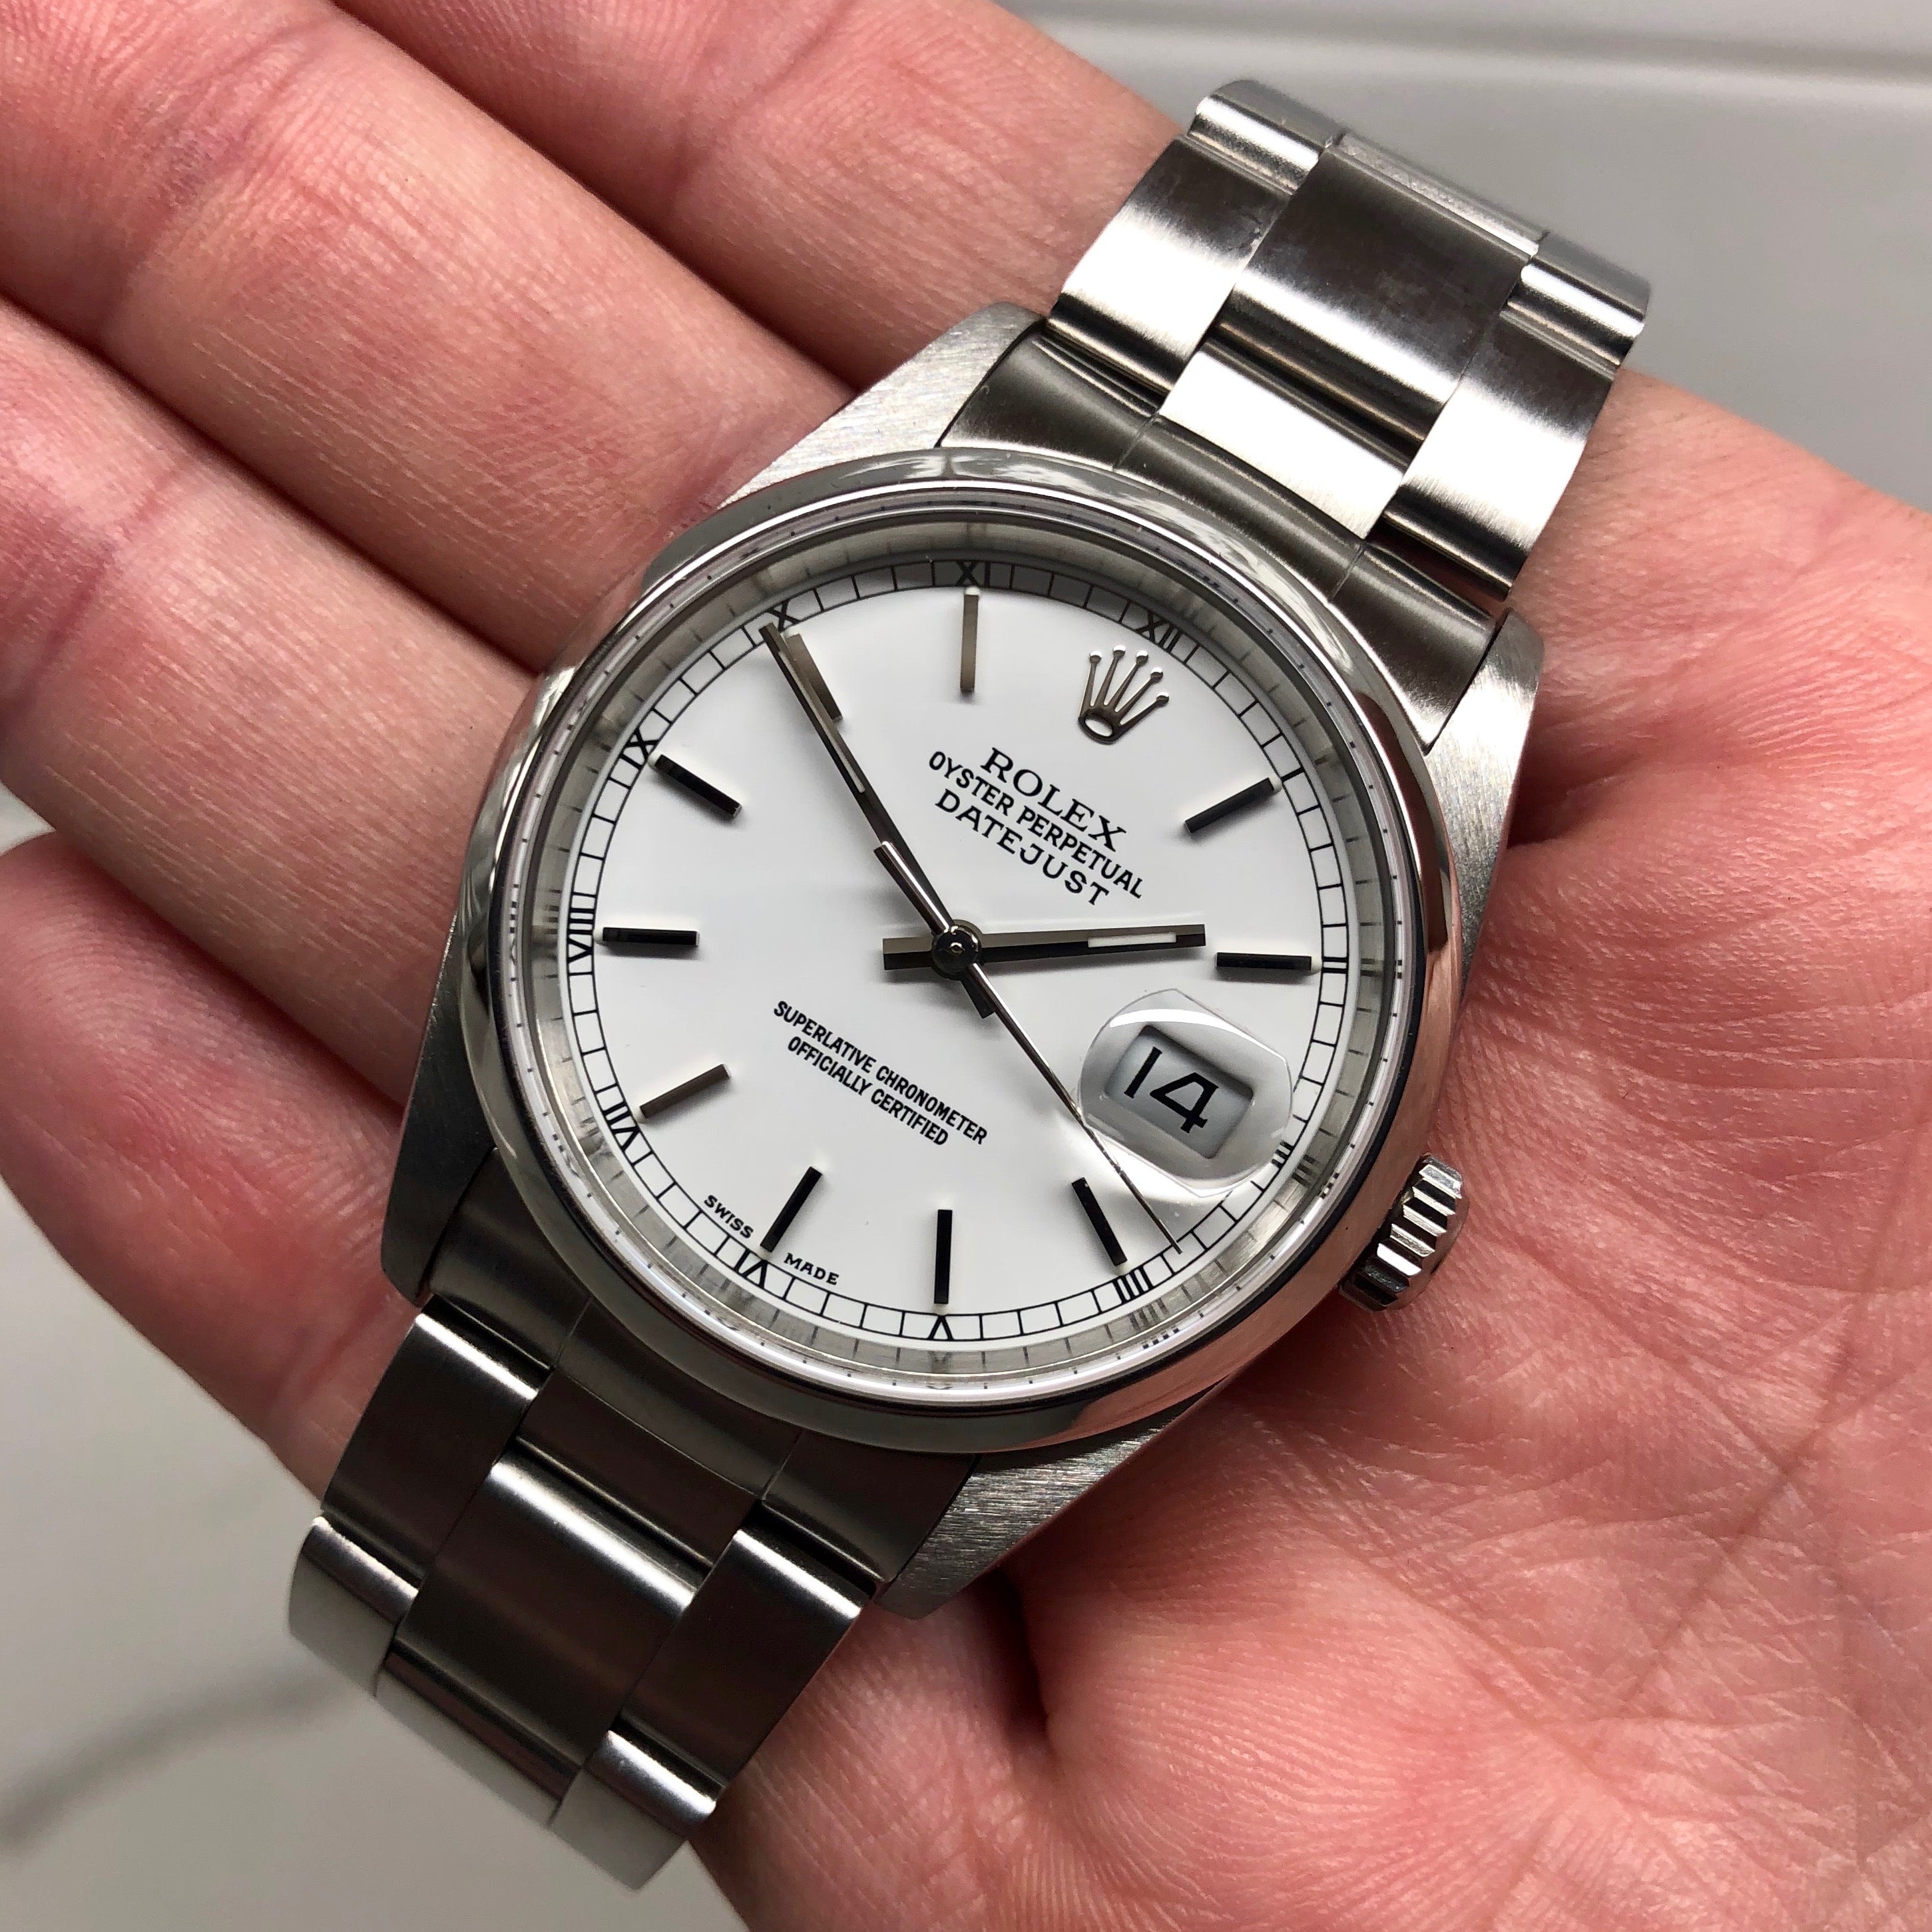 Datejust 16200 Oyster Perpetual White "Y" Serial Wristwatch | HashtagWatchCo